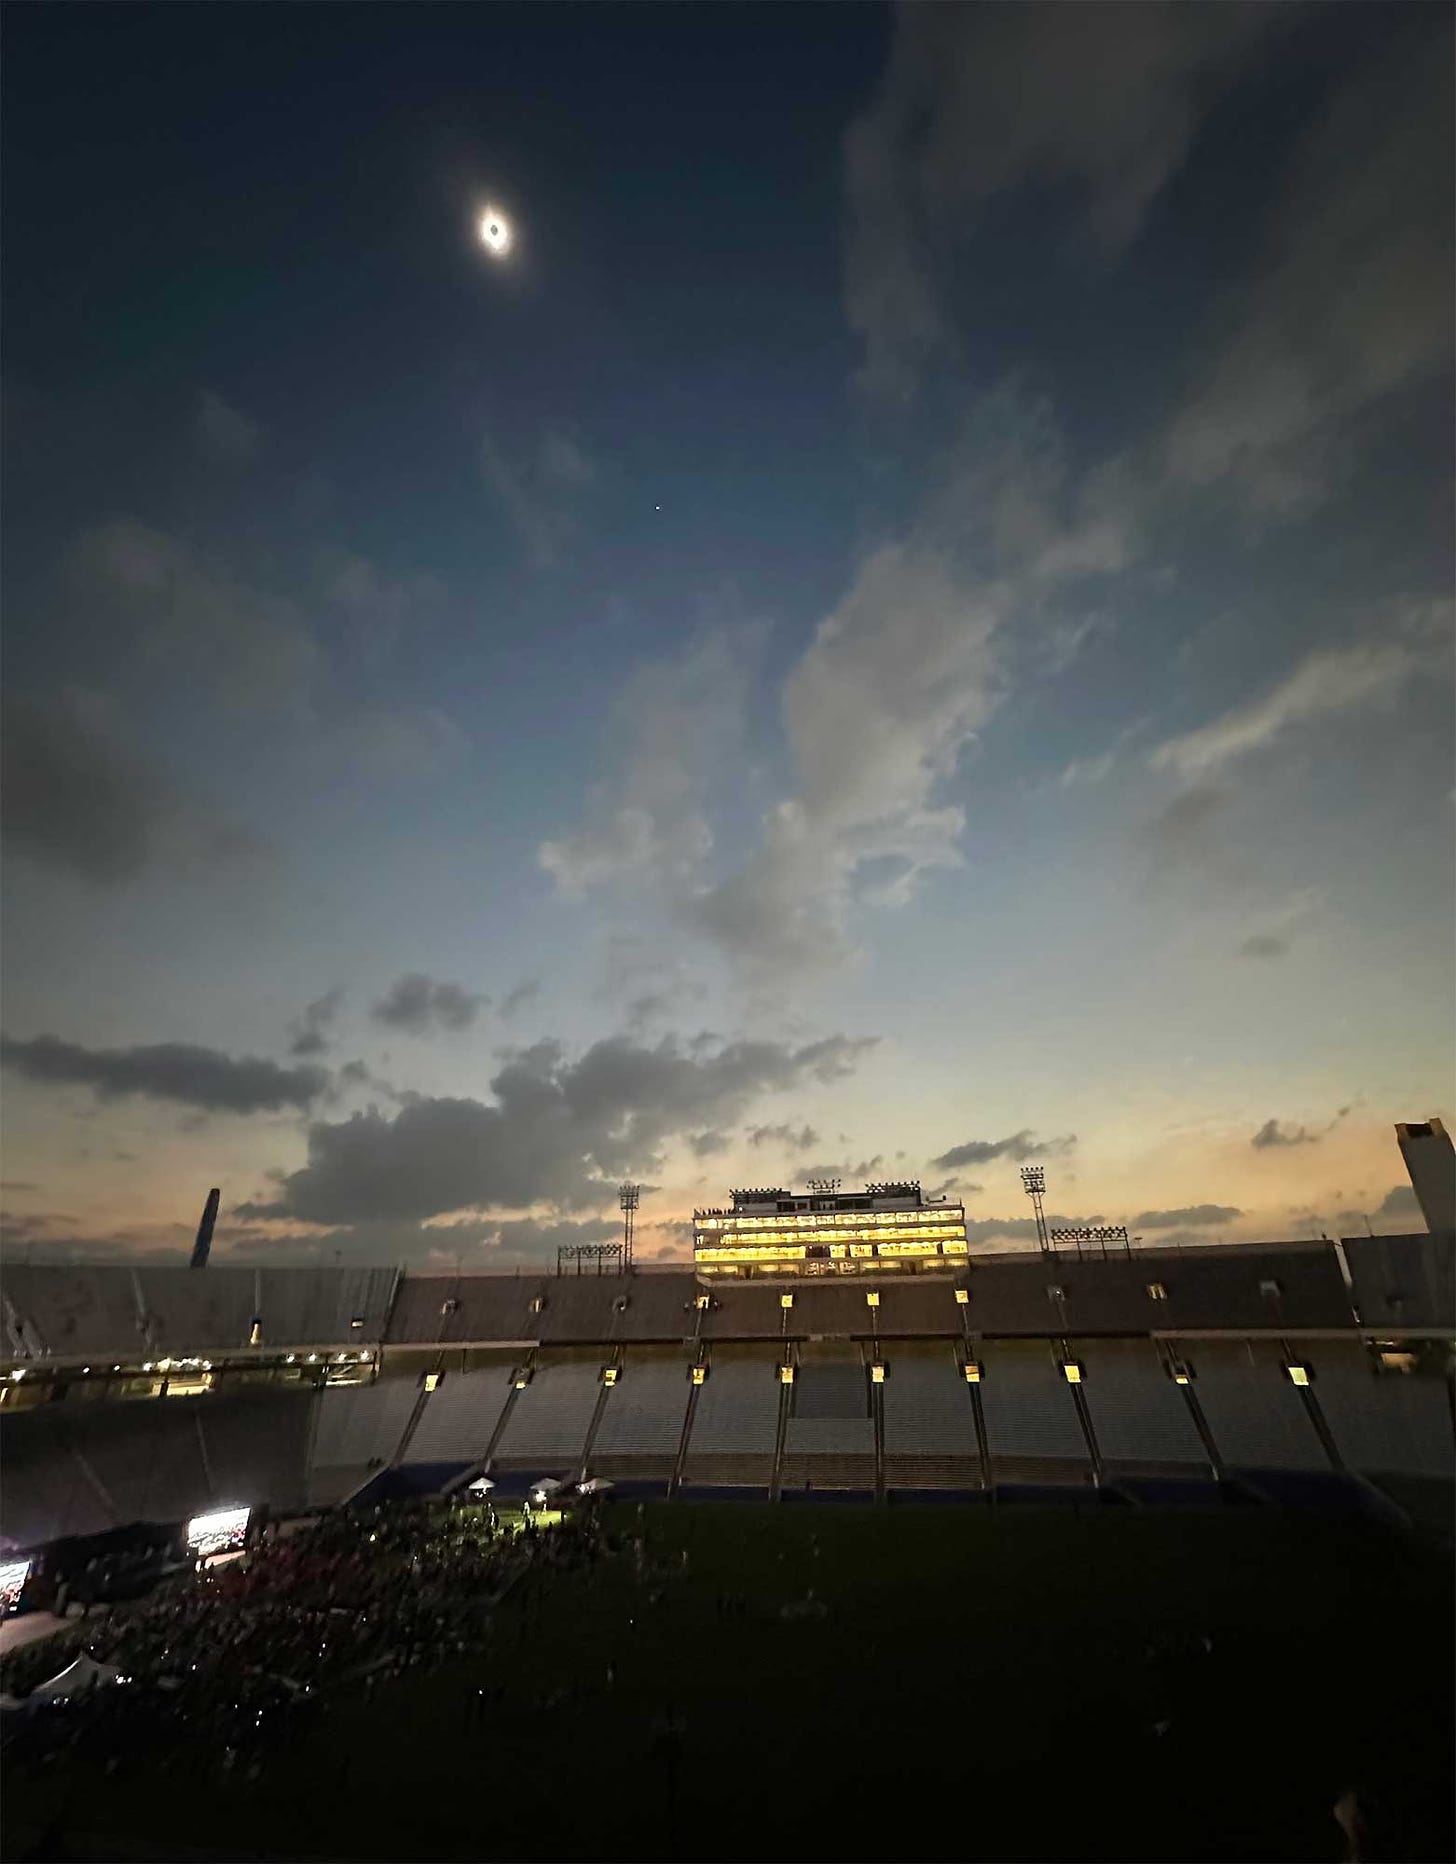 Eclipsed sun over stadium with stars visible in an early night like sky.